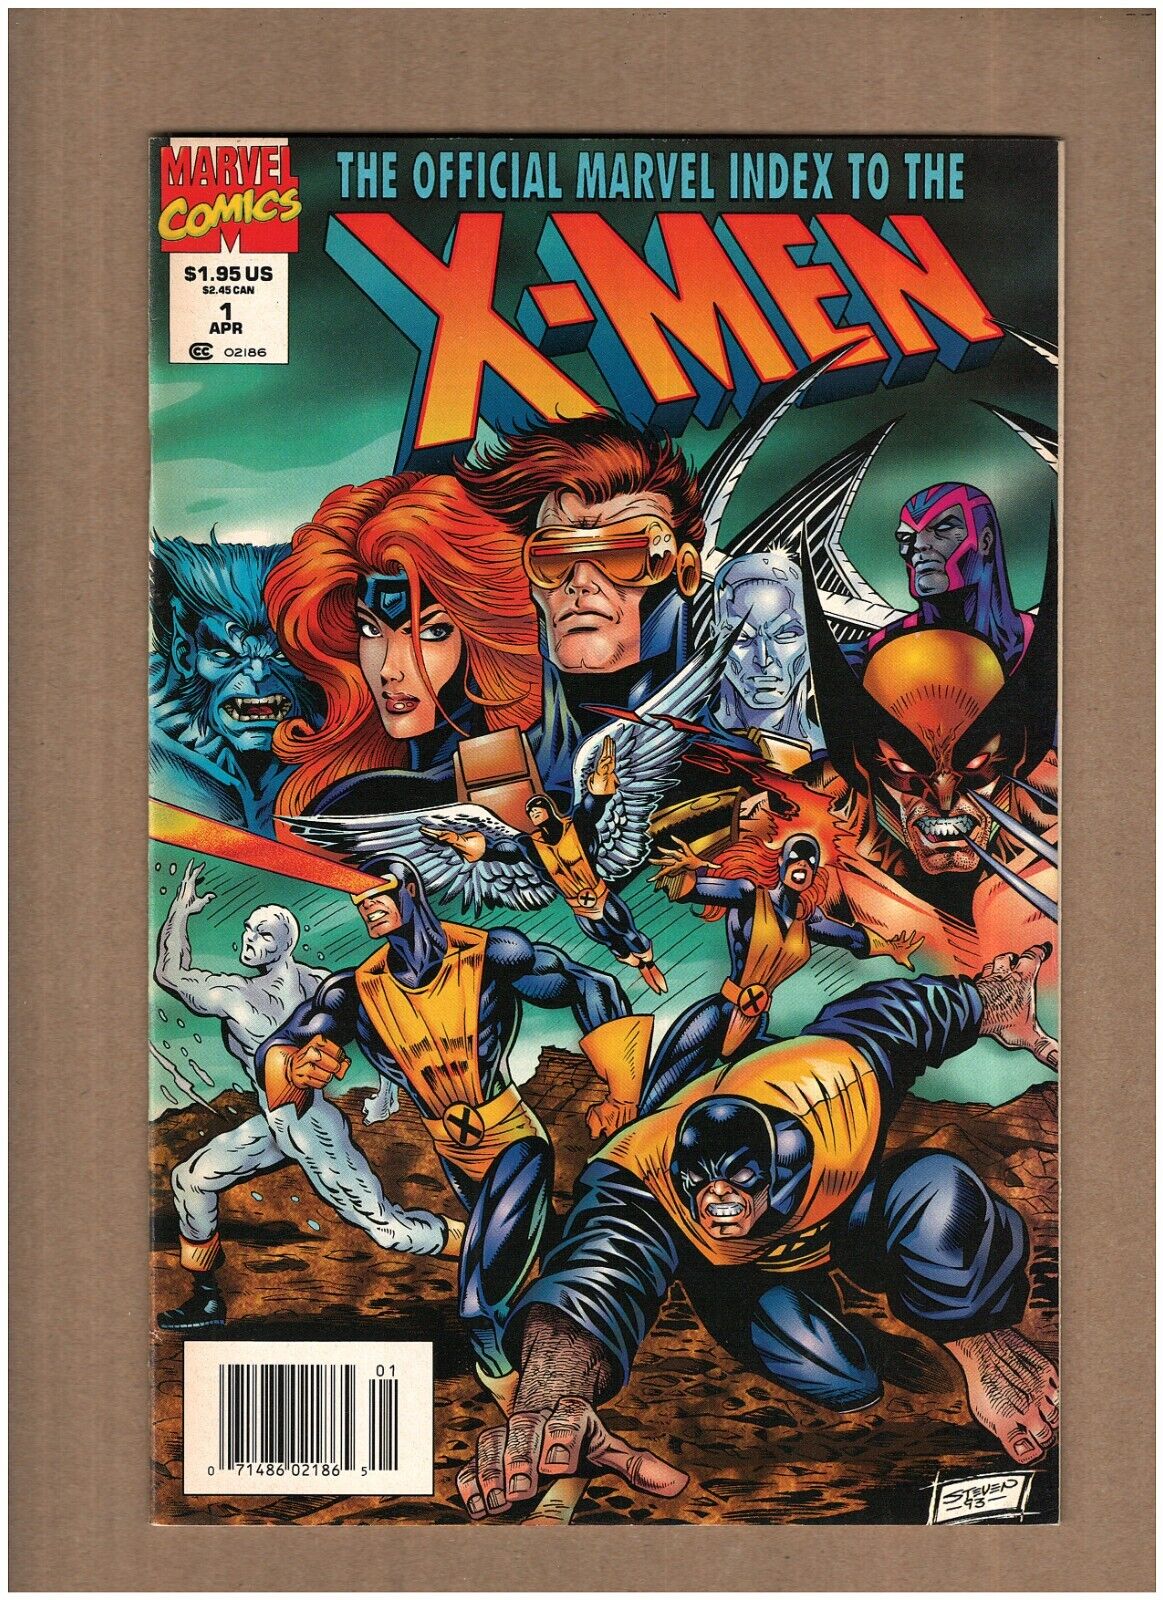 Official Marvel Index to the X-Men #1 Newsstand Marvel Comics 1994 VF+ 8.5